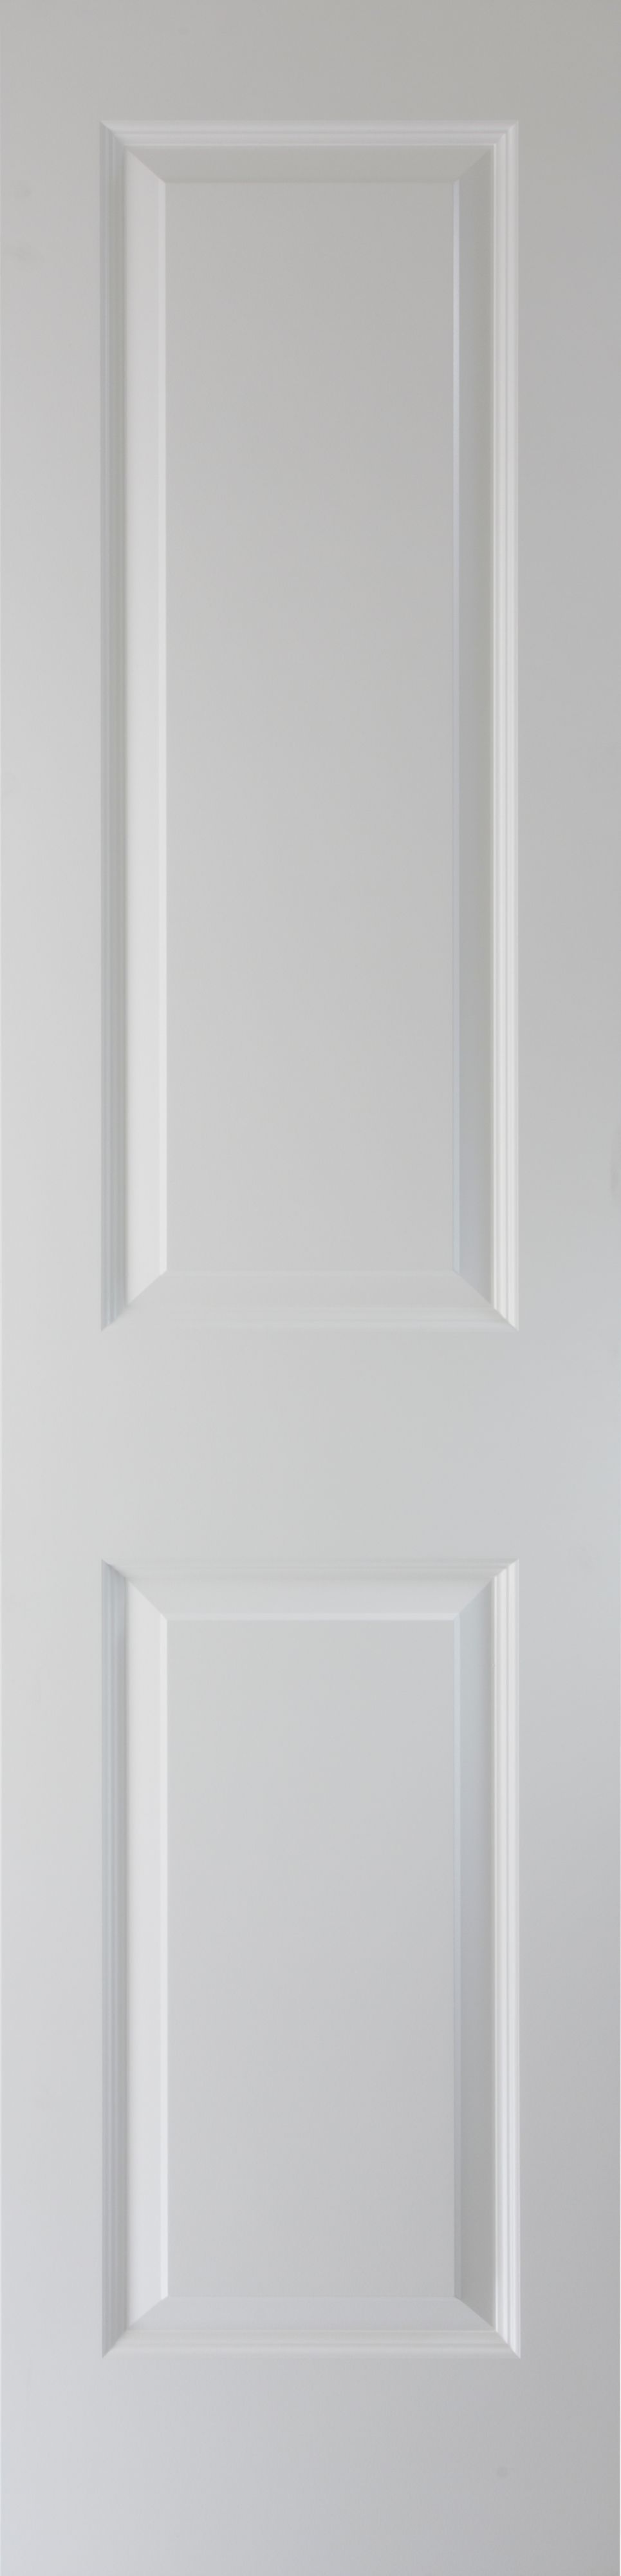 2 panel MDF Patterned Unglazed Contemporary White Internal Door, (H)1981mm (W)457mm (T)35mm